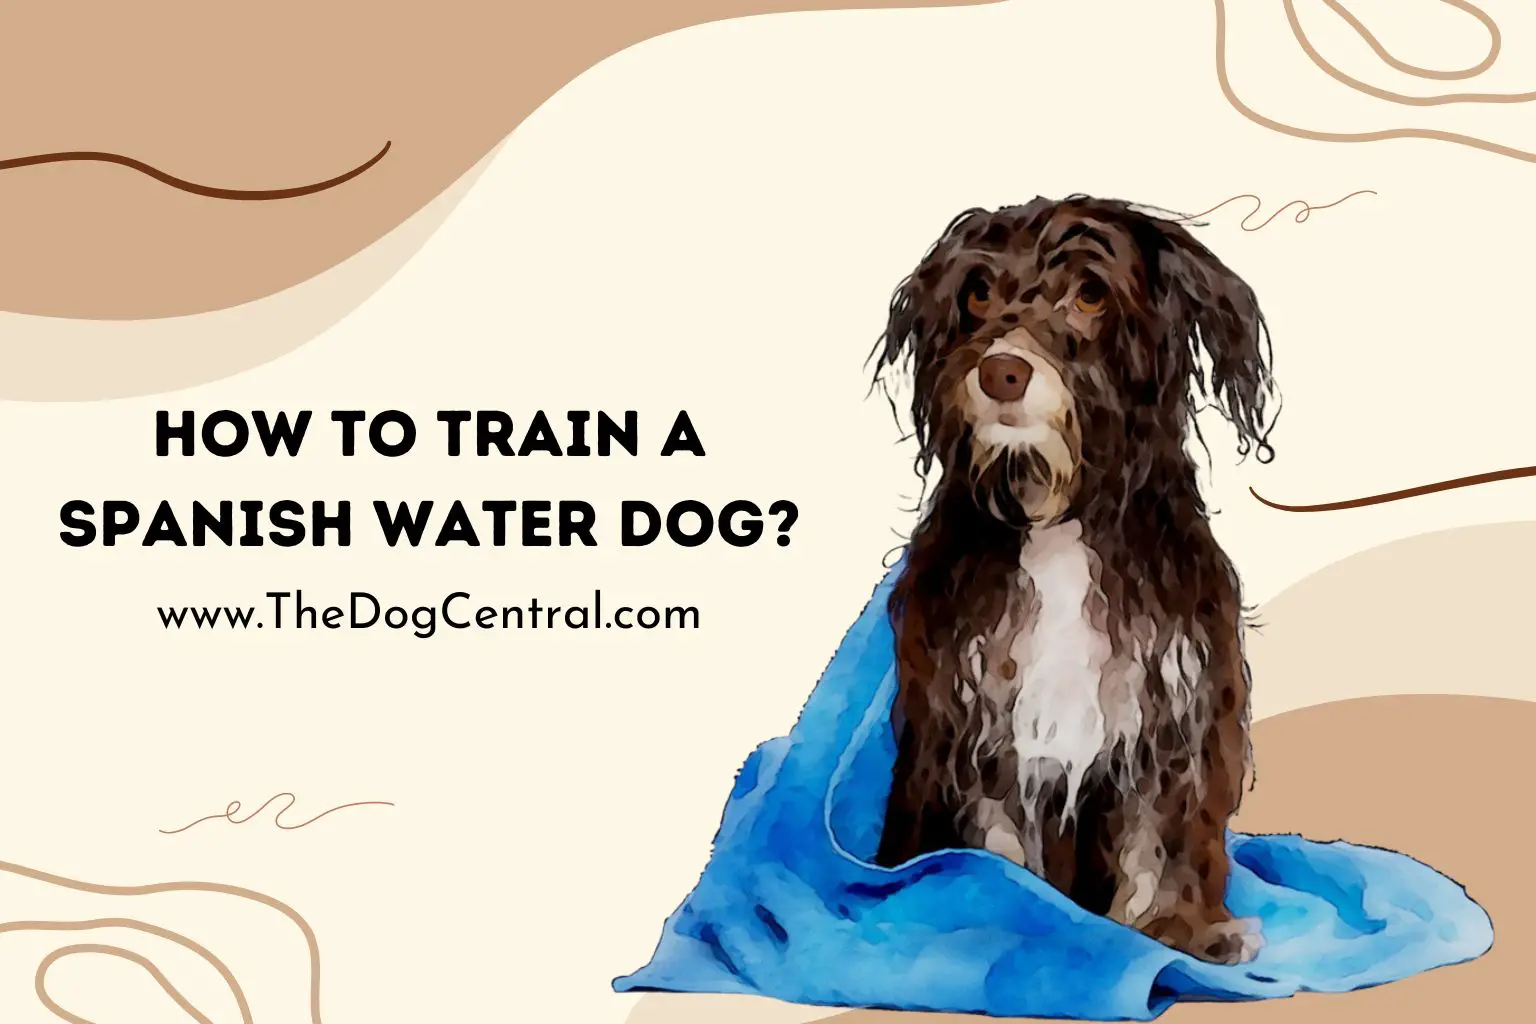 How to Train a Spanish Water Dog